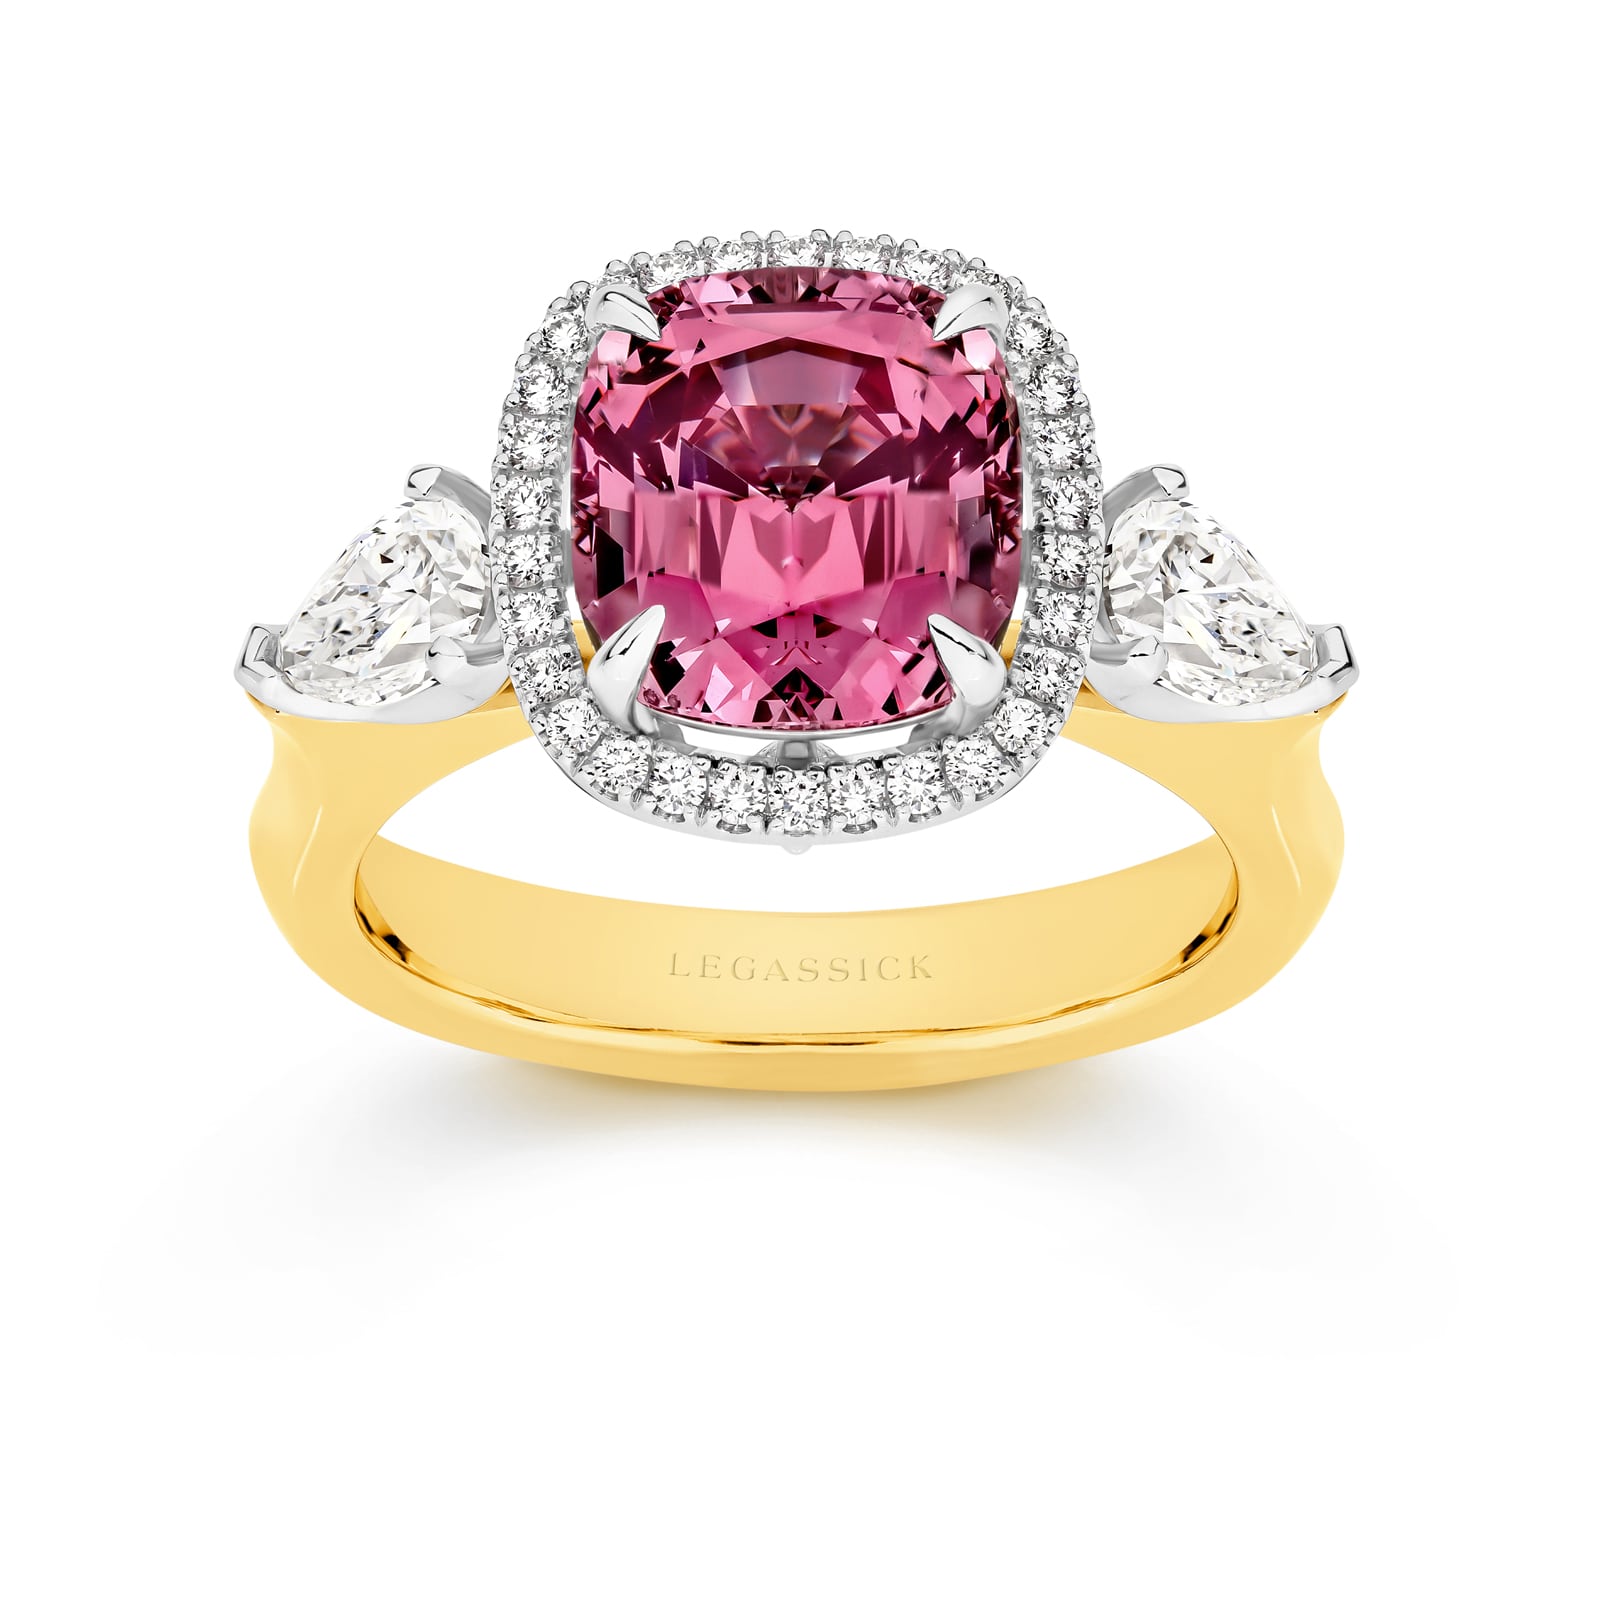 Victoria is a rare and highly desirable 4.16 carat pink Spinel and diamond ring. She was designed and handcrafted by LeGassick's Master Jewellers, Gold Coast, Australia.